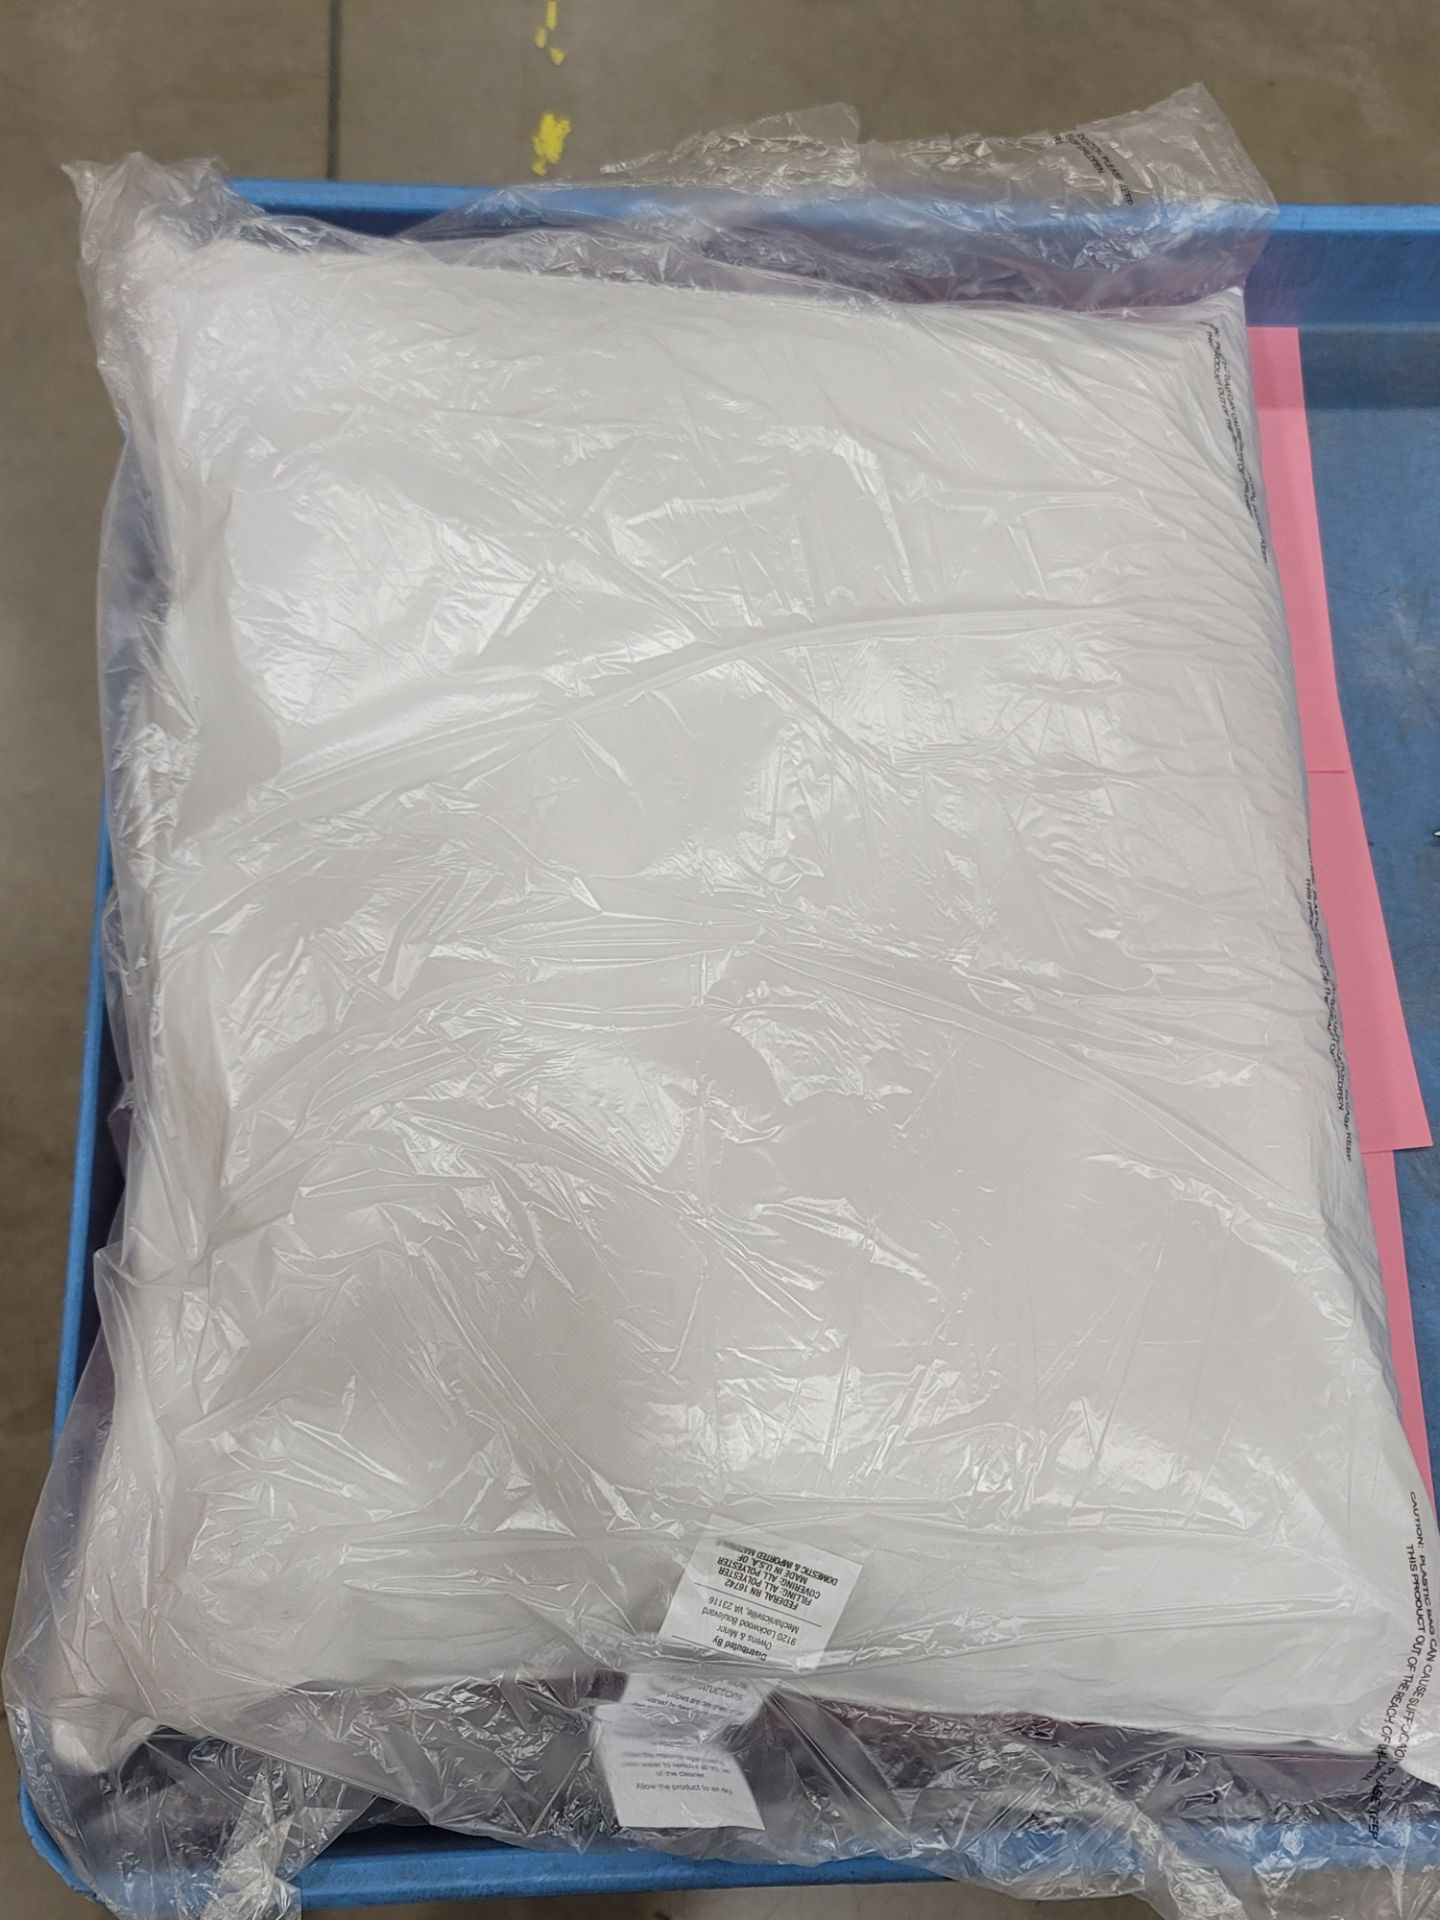 MEDICHOICE Pillow Reuse, 1 PALLET - Image 2 of 5